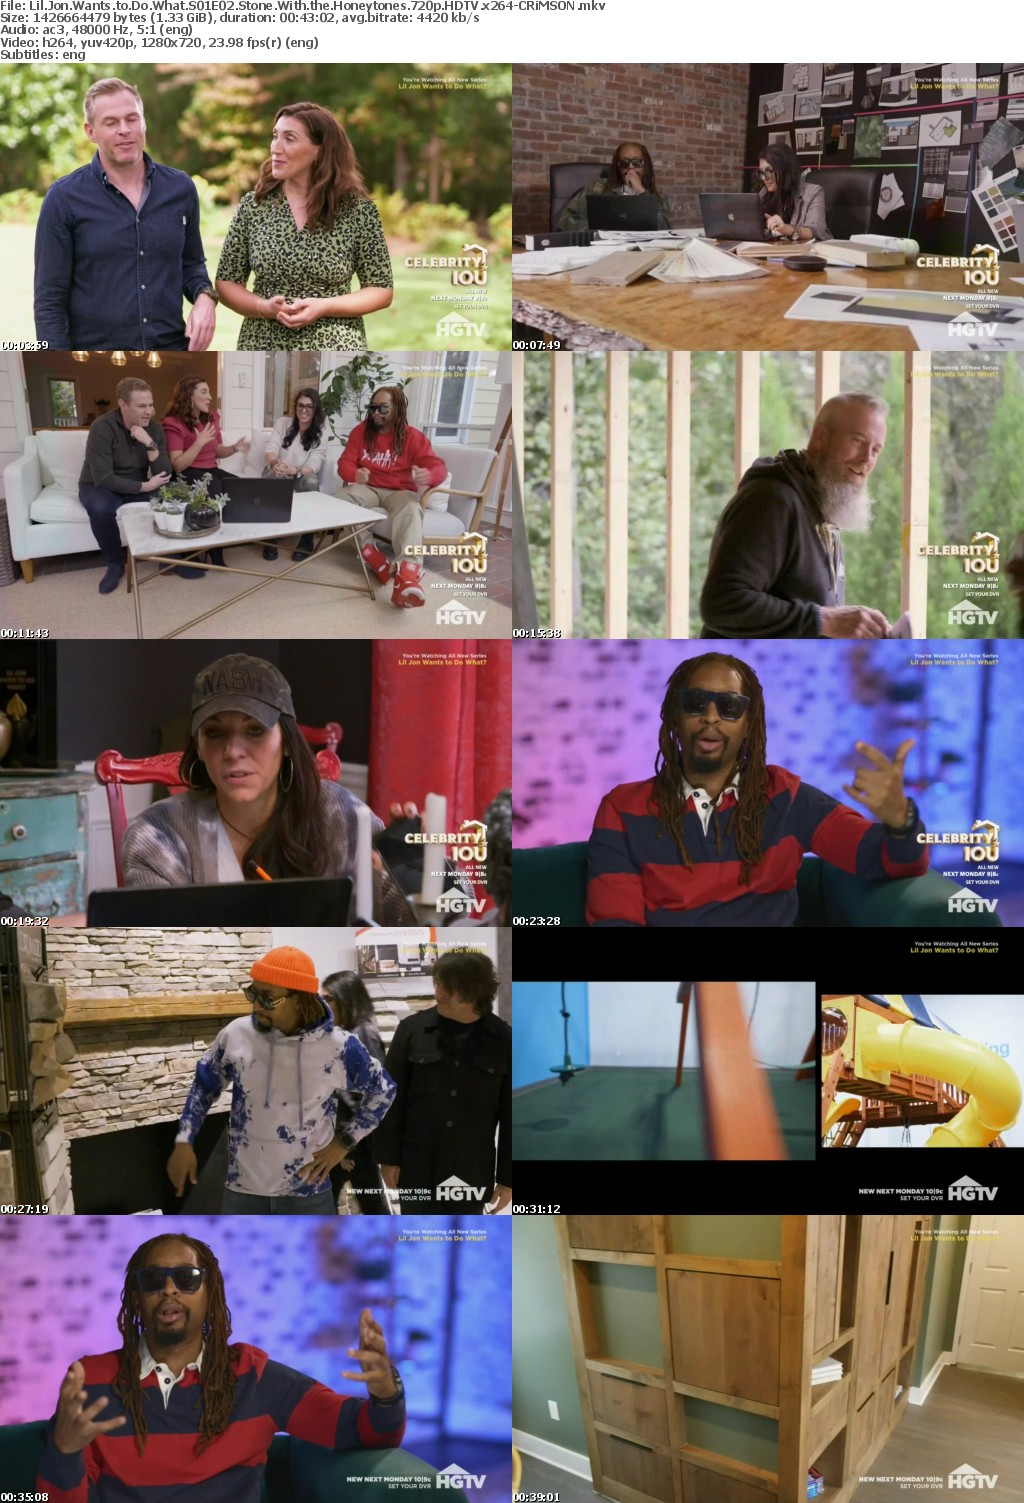 Lil Jon Wants to Do What S01E02 Stone With the Honeytones 720p HDTV x264-CRiMSON